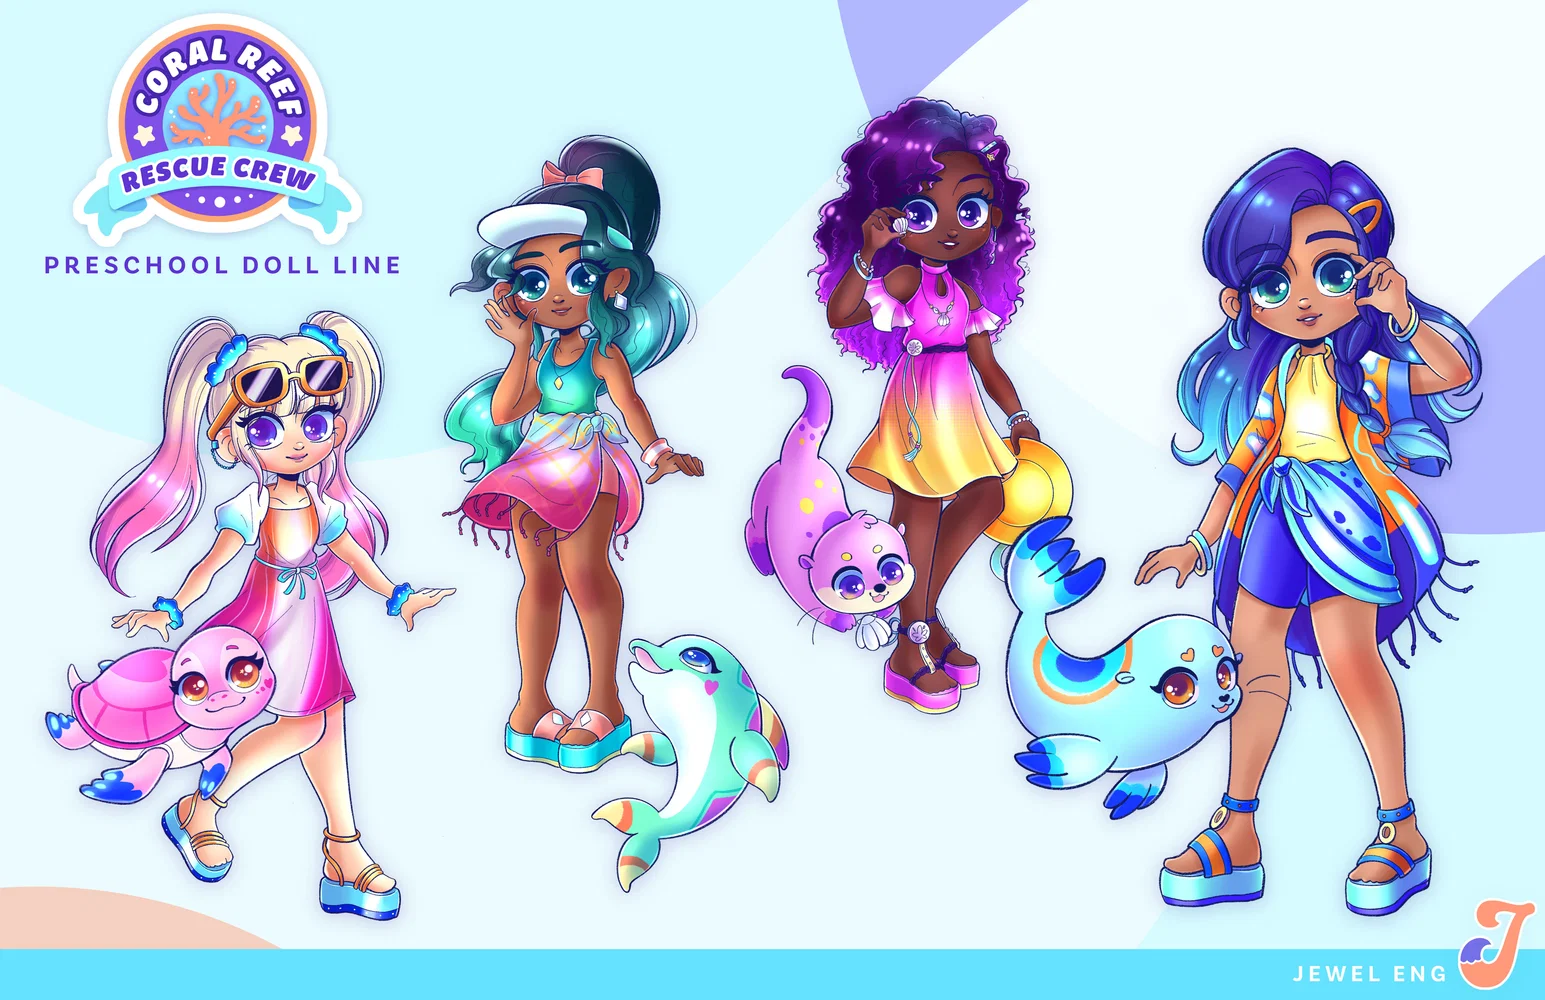 A portfolio page for Coral Reef Rescue Crew, depicting a doll line. All the girls in the line are all in bright neon beachside fashions and have an animal friend counterpart. 